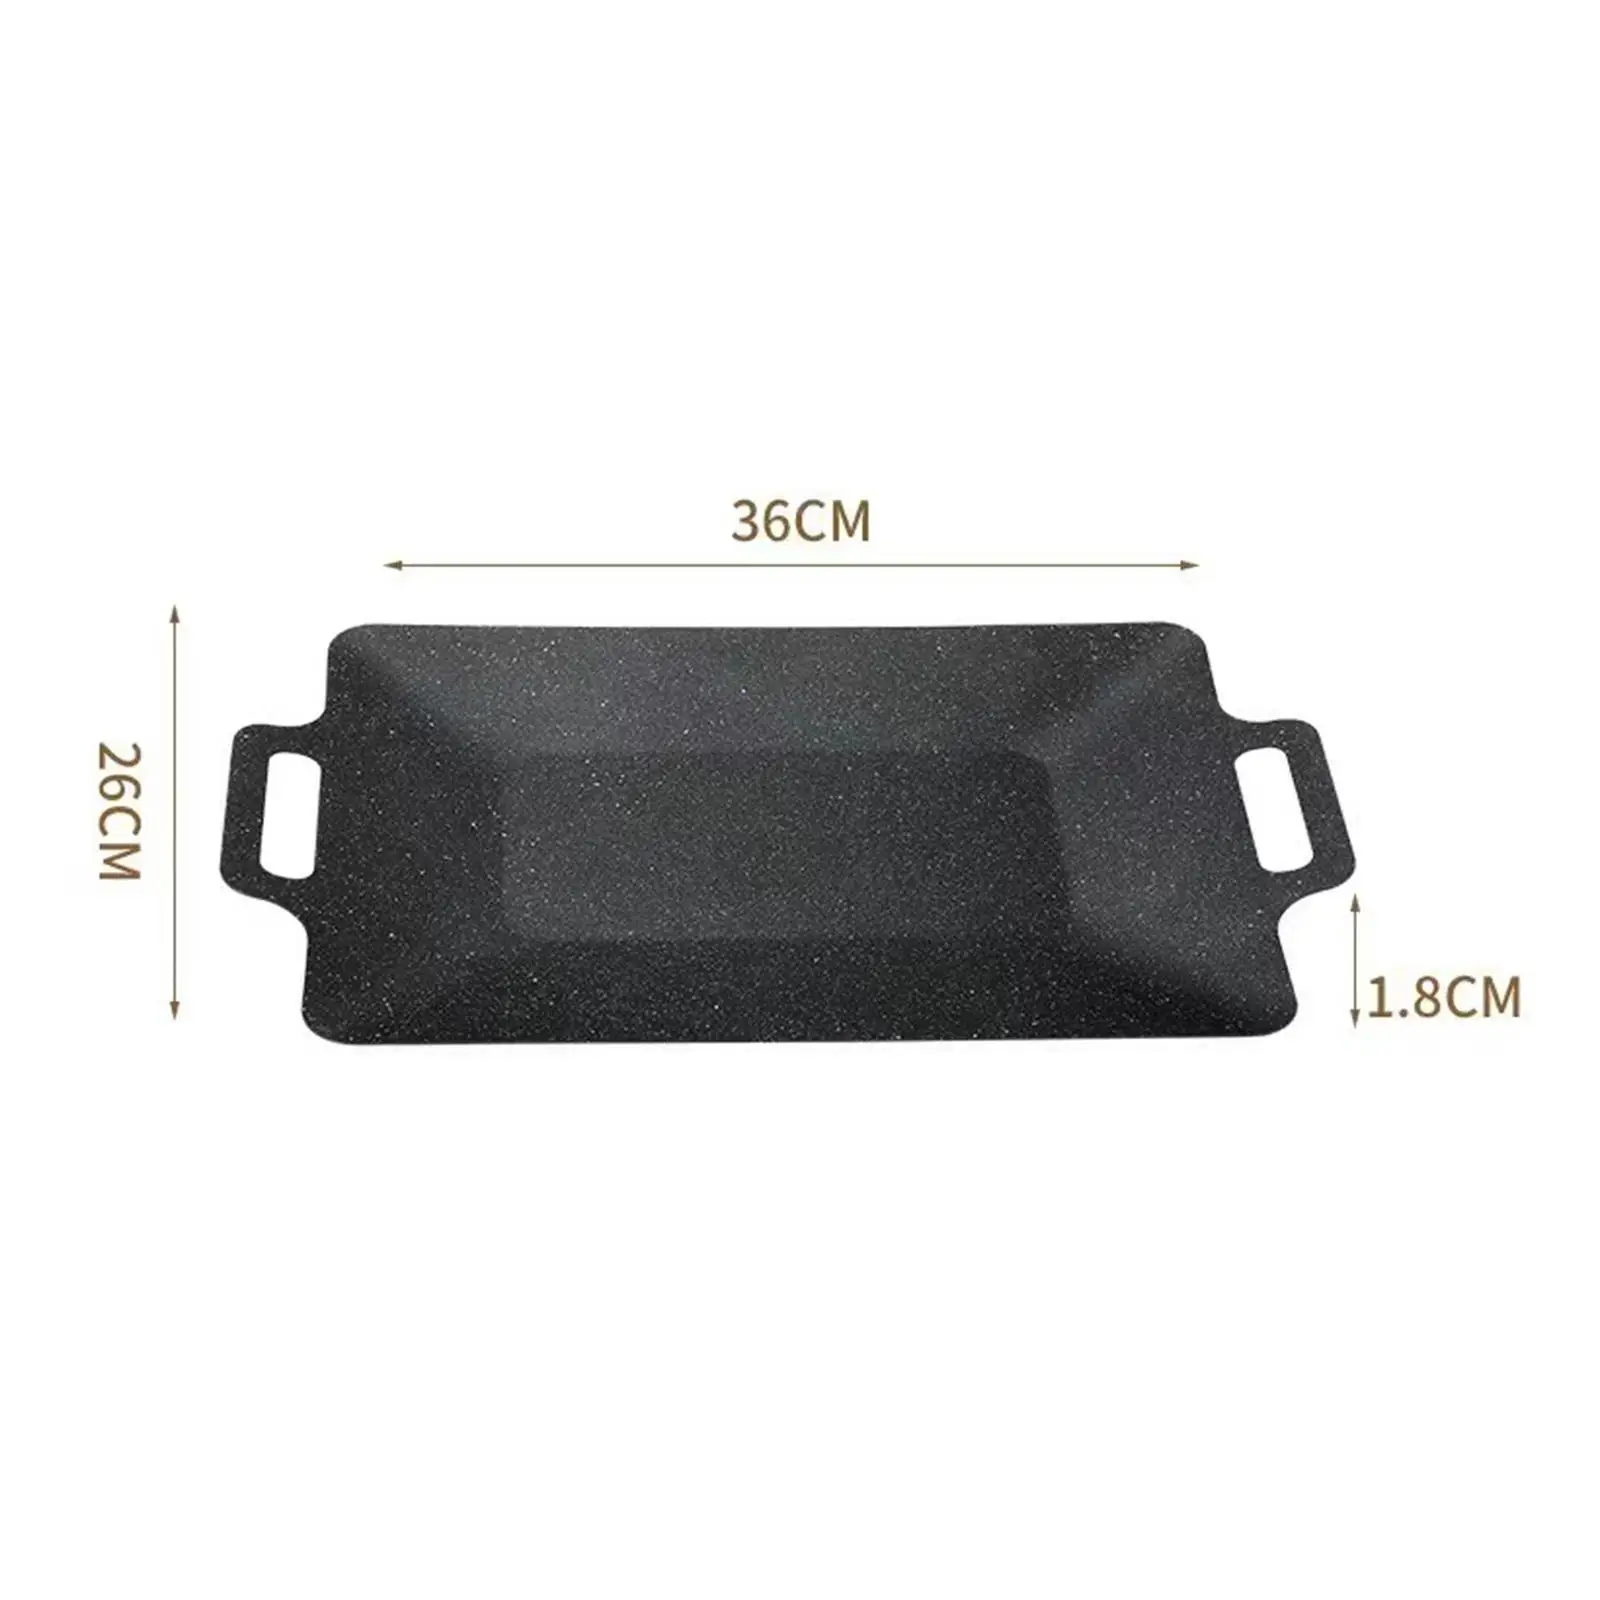 Korean BBQ Pan Indoor or Outdoor Grilling Pan BBQ Griddle Griddle Pan for BBQ Kitchen